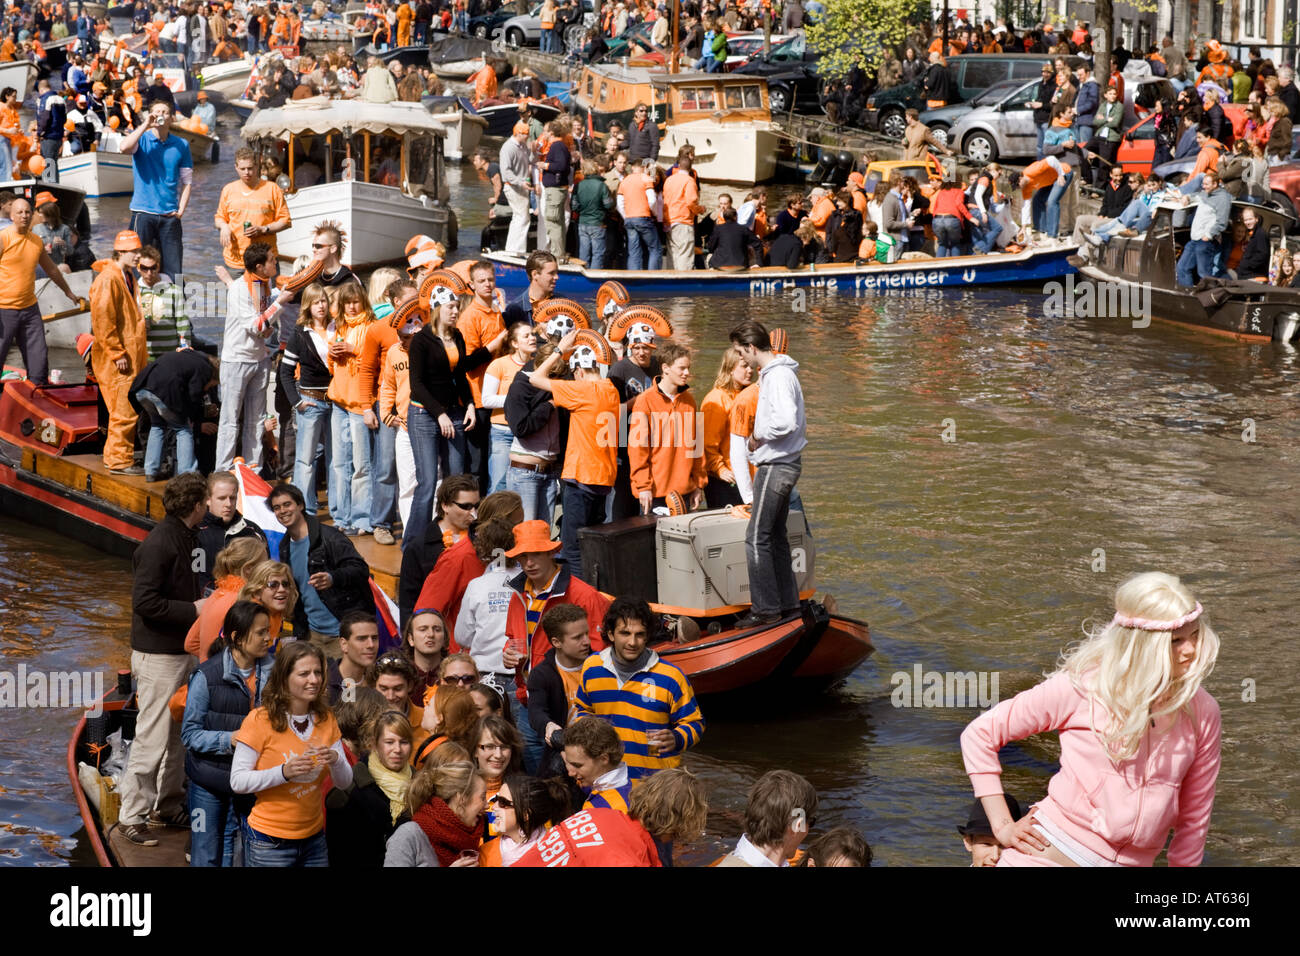 Orange gridlock in the canals of Amsterdam on the celebration of the Queen's Birthday: the all-important Koninginnedag. Stock Photo